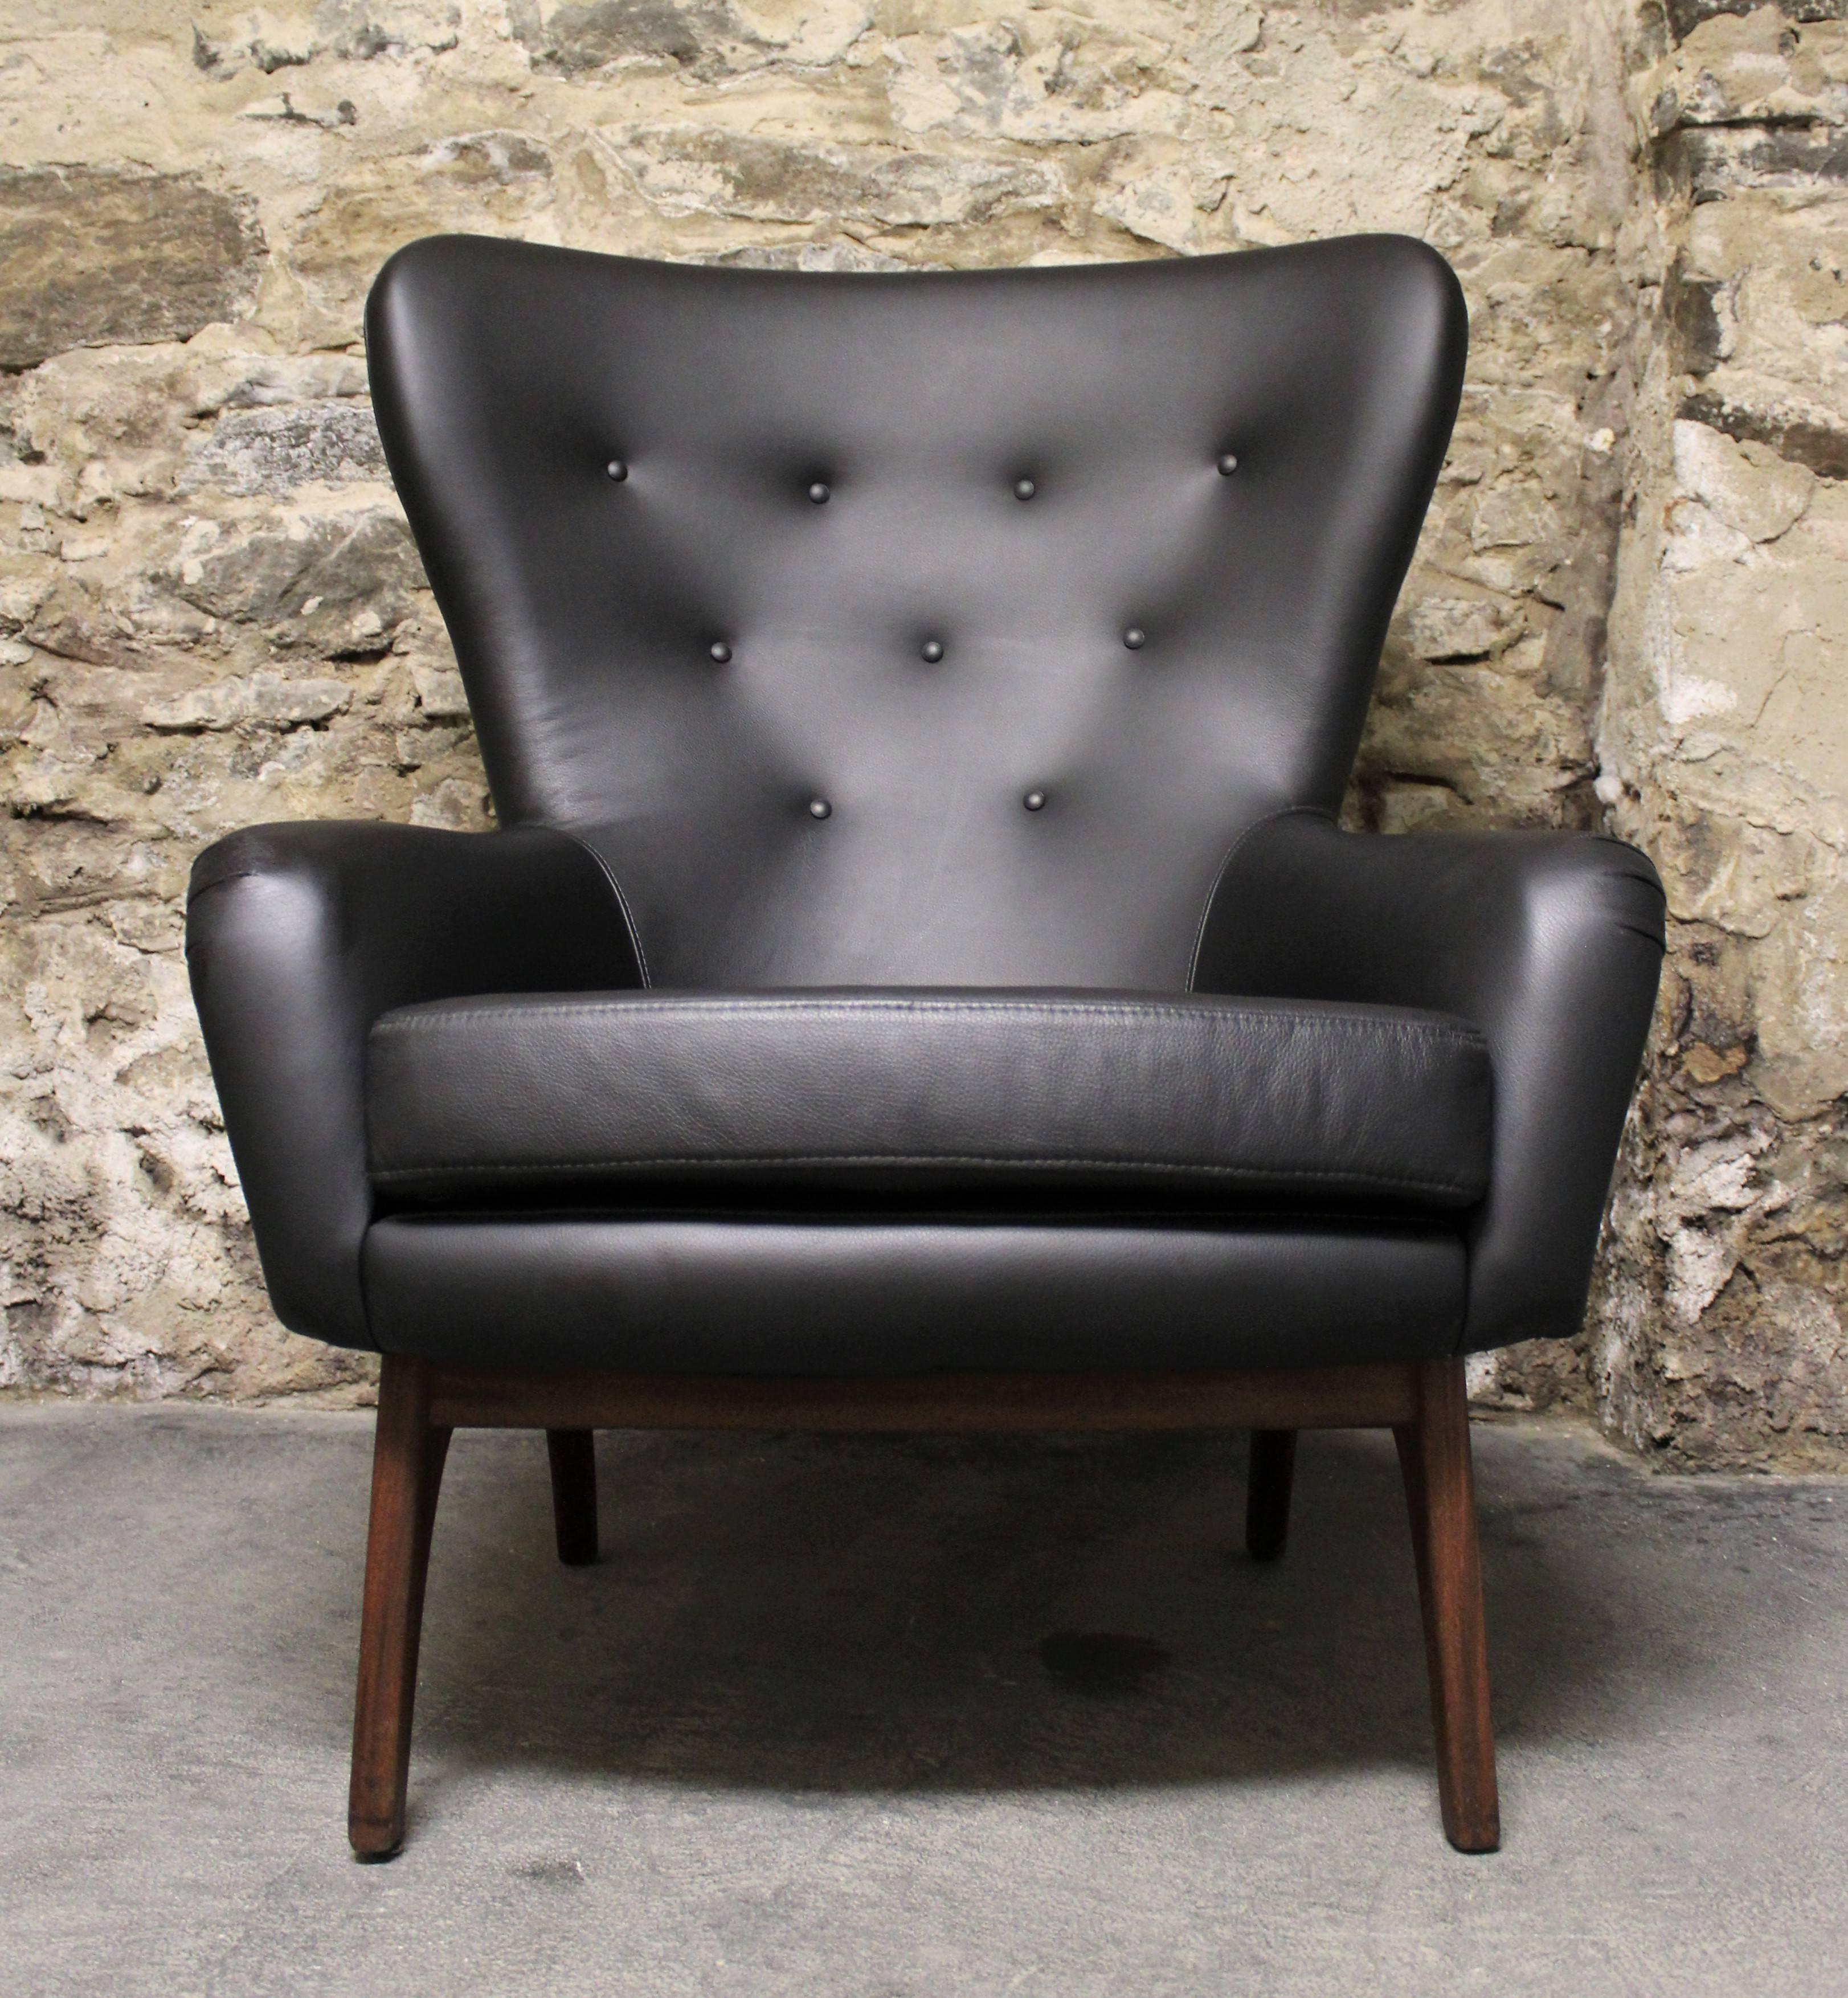 Adrian Pearsall wingback chair with a sculpted walnut frame and re-upholstered in leather.